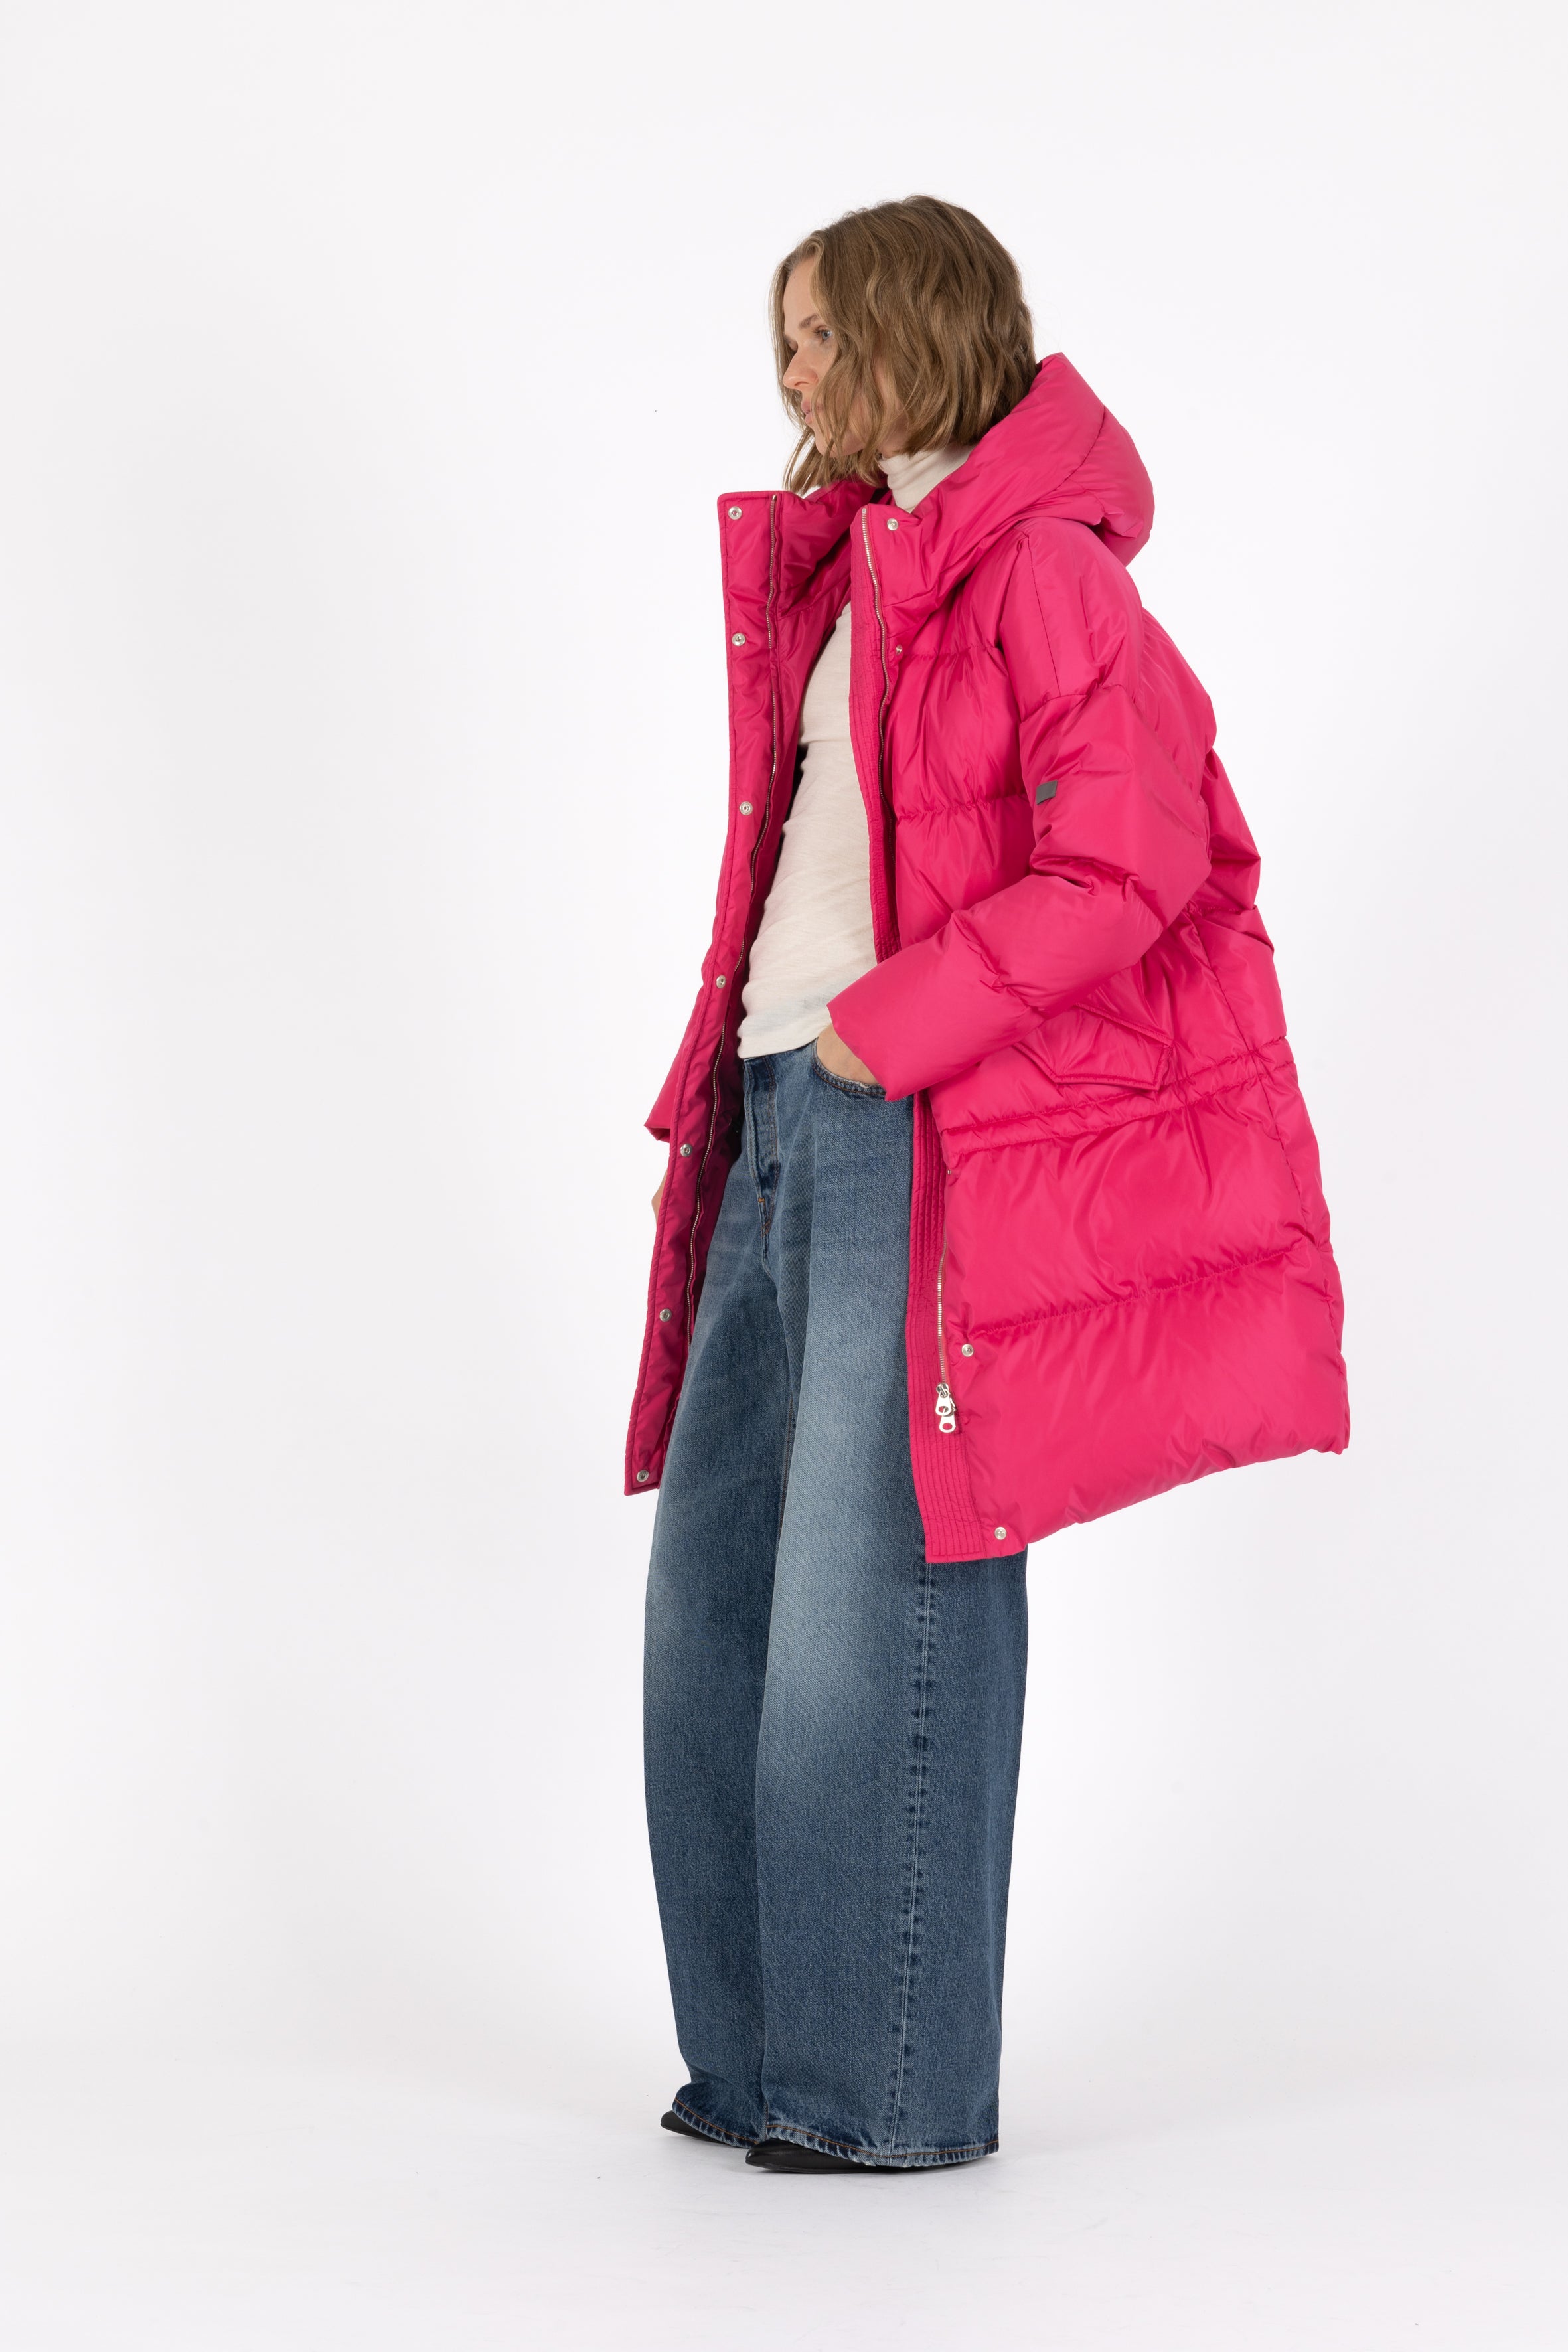 oversized Lempelius down parka in the color pink